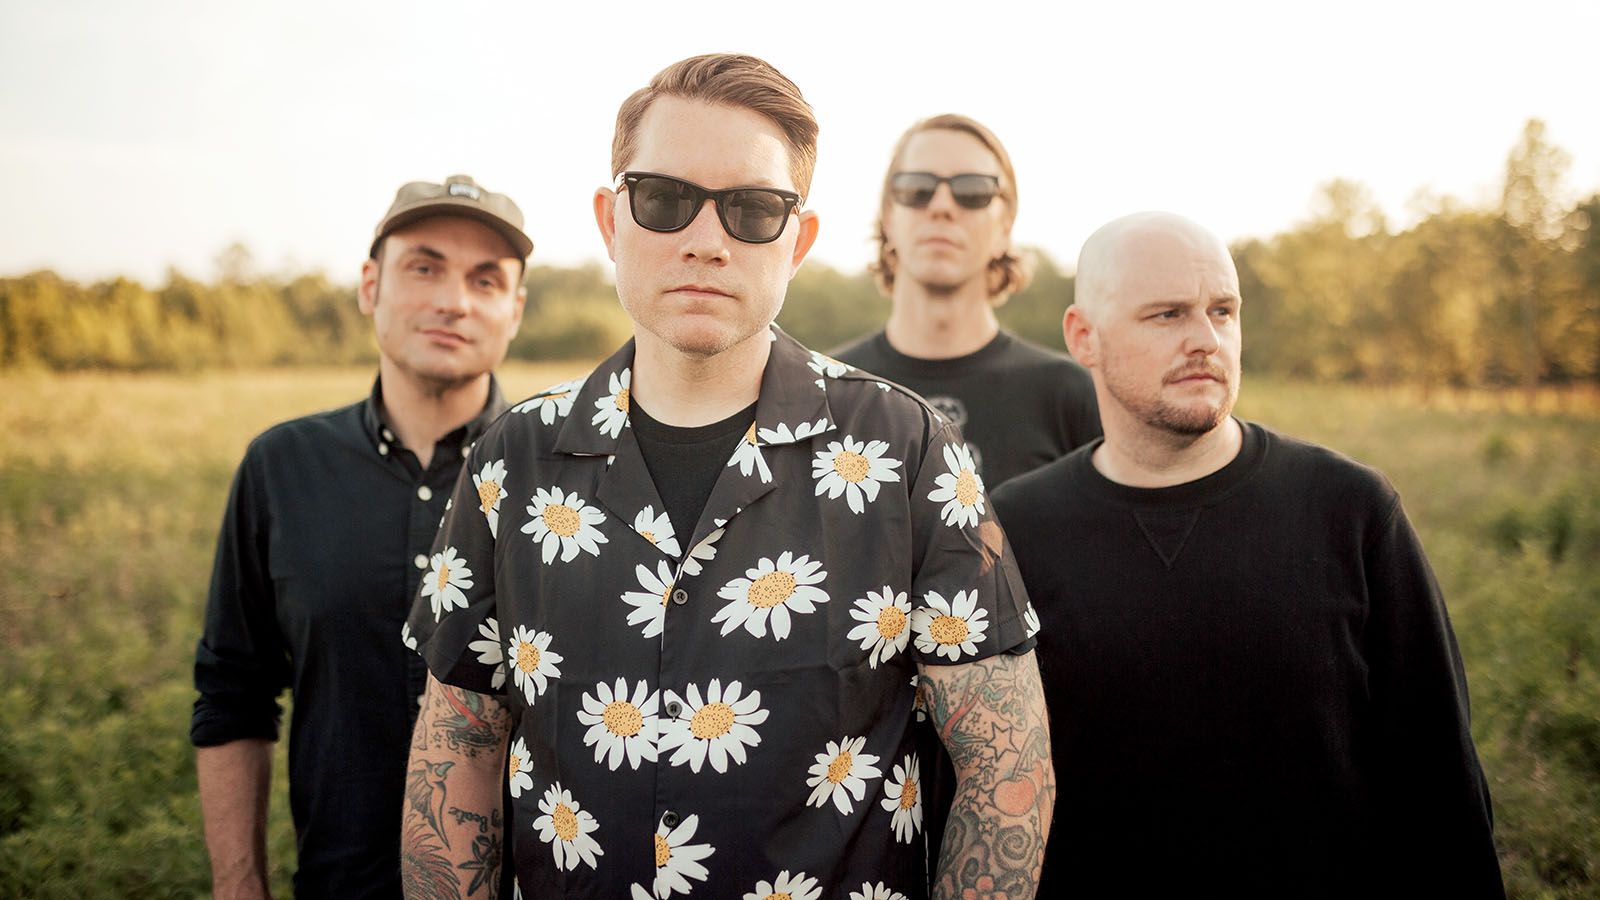 Hawthorne Heights will bring their 20 Years of Tears tour to The Clyde Theatre on Thursday, July 25, with Thursday, Anberlin, Armor for Sleep, Stick to Your Guns, and This Wild Life.